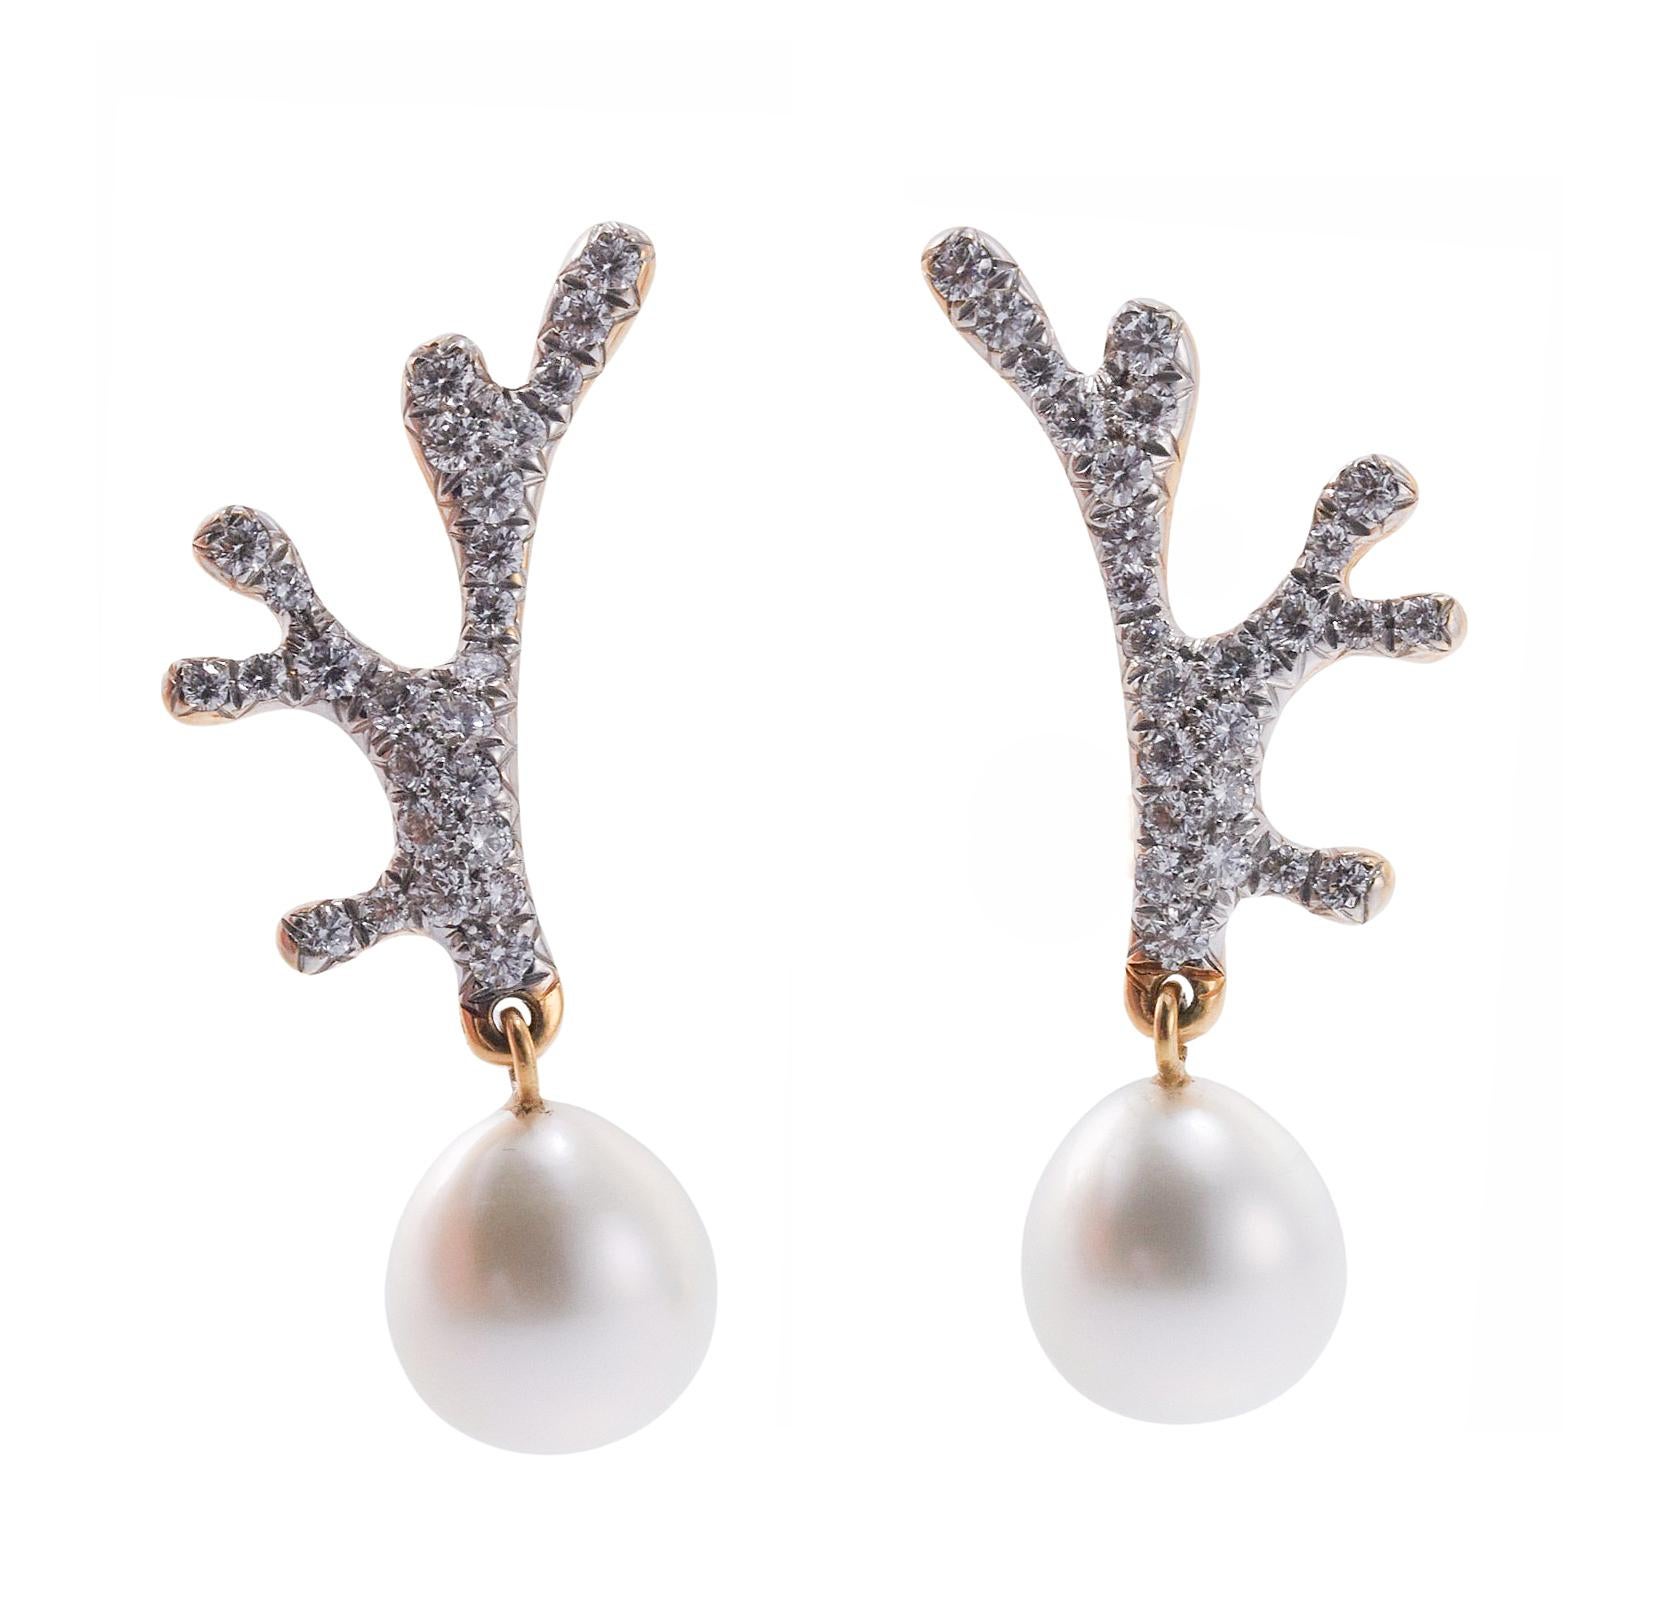 Pair of coral motif 18k gold earrings, crafted by Angela Cummings in collaboration with Assael, set with 12mm  South Sea  pearls, and approx. 1.95ctw G/Vs diamonds. The current retail on the pair is $ 14500.  Th earrings are 1.75